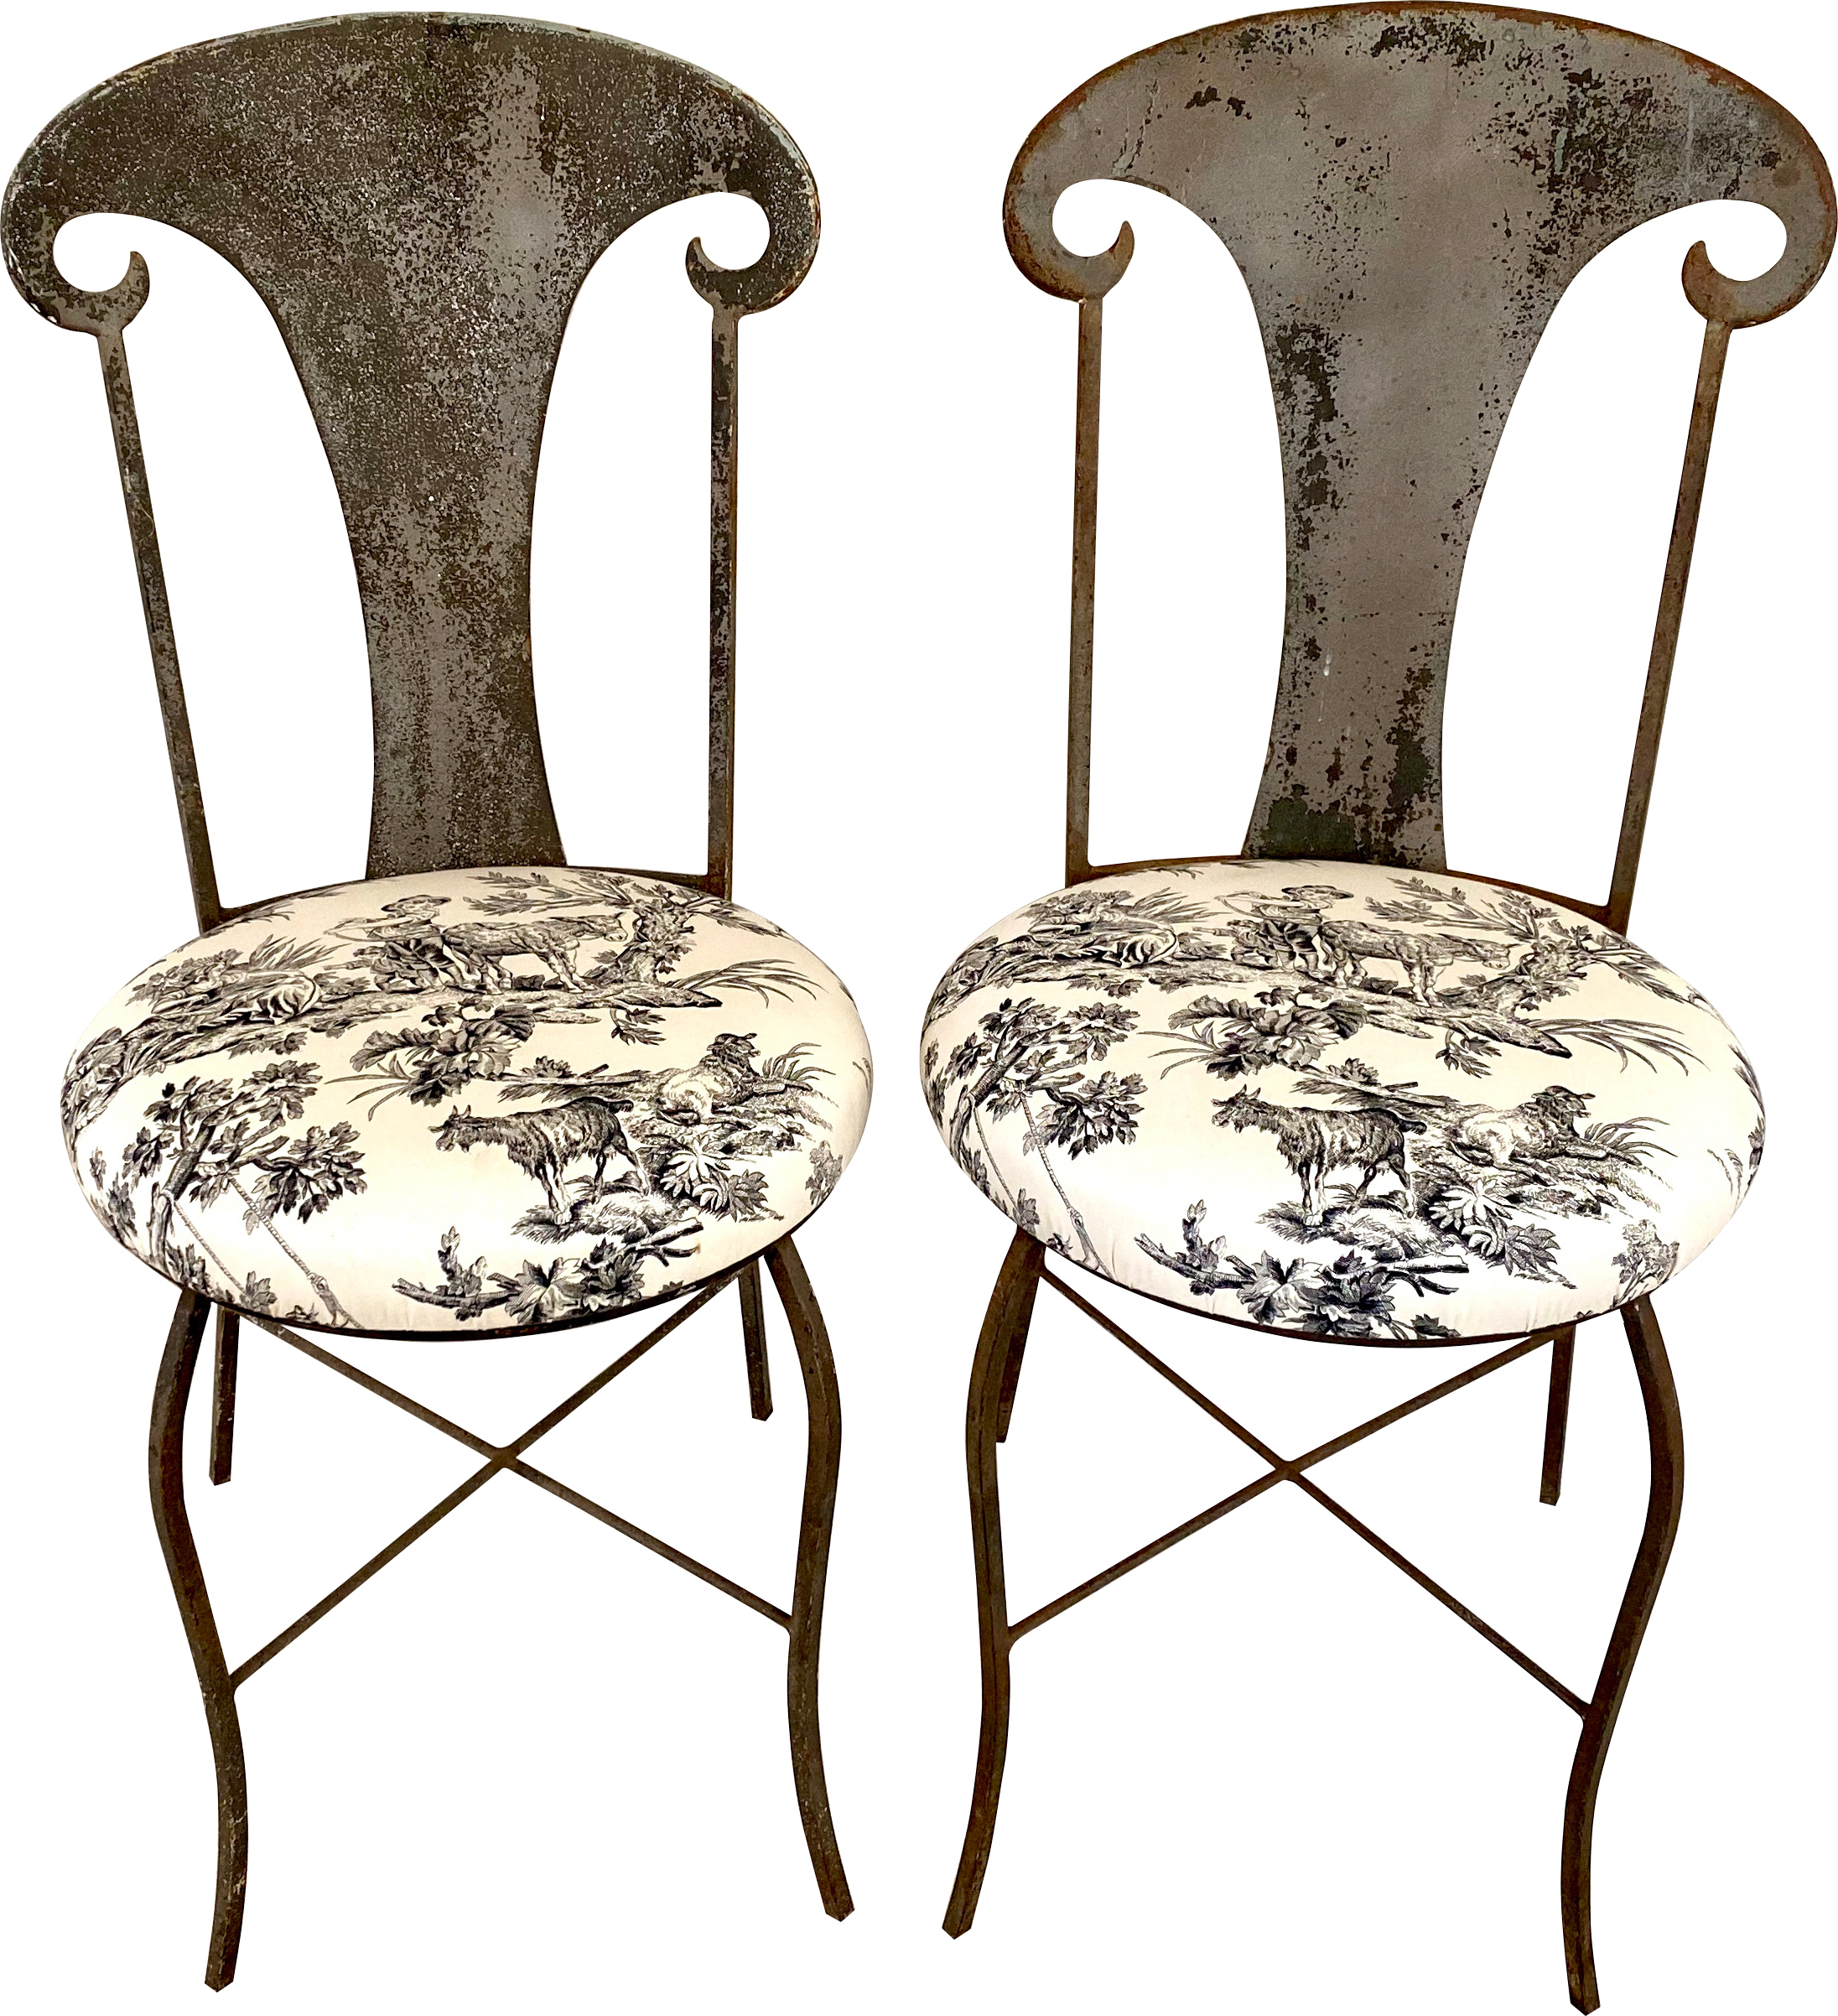 S/2 Vintage French Gray Garden Chairs~P77663829